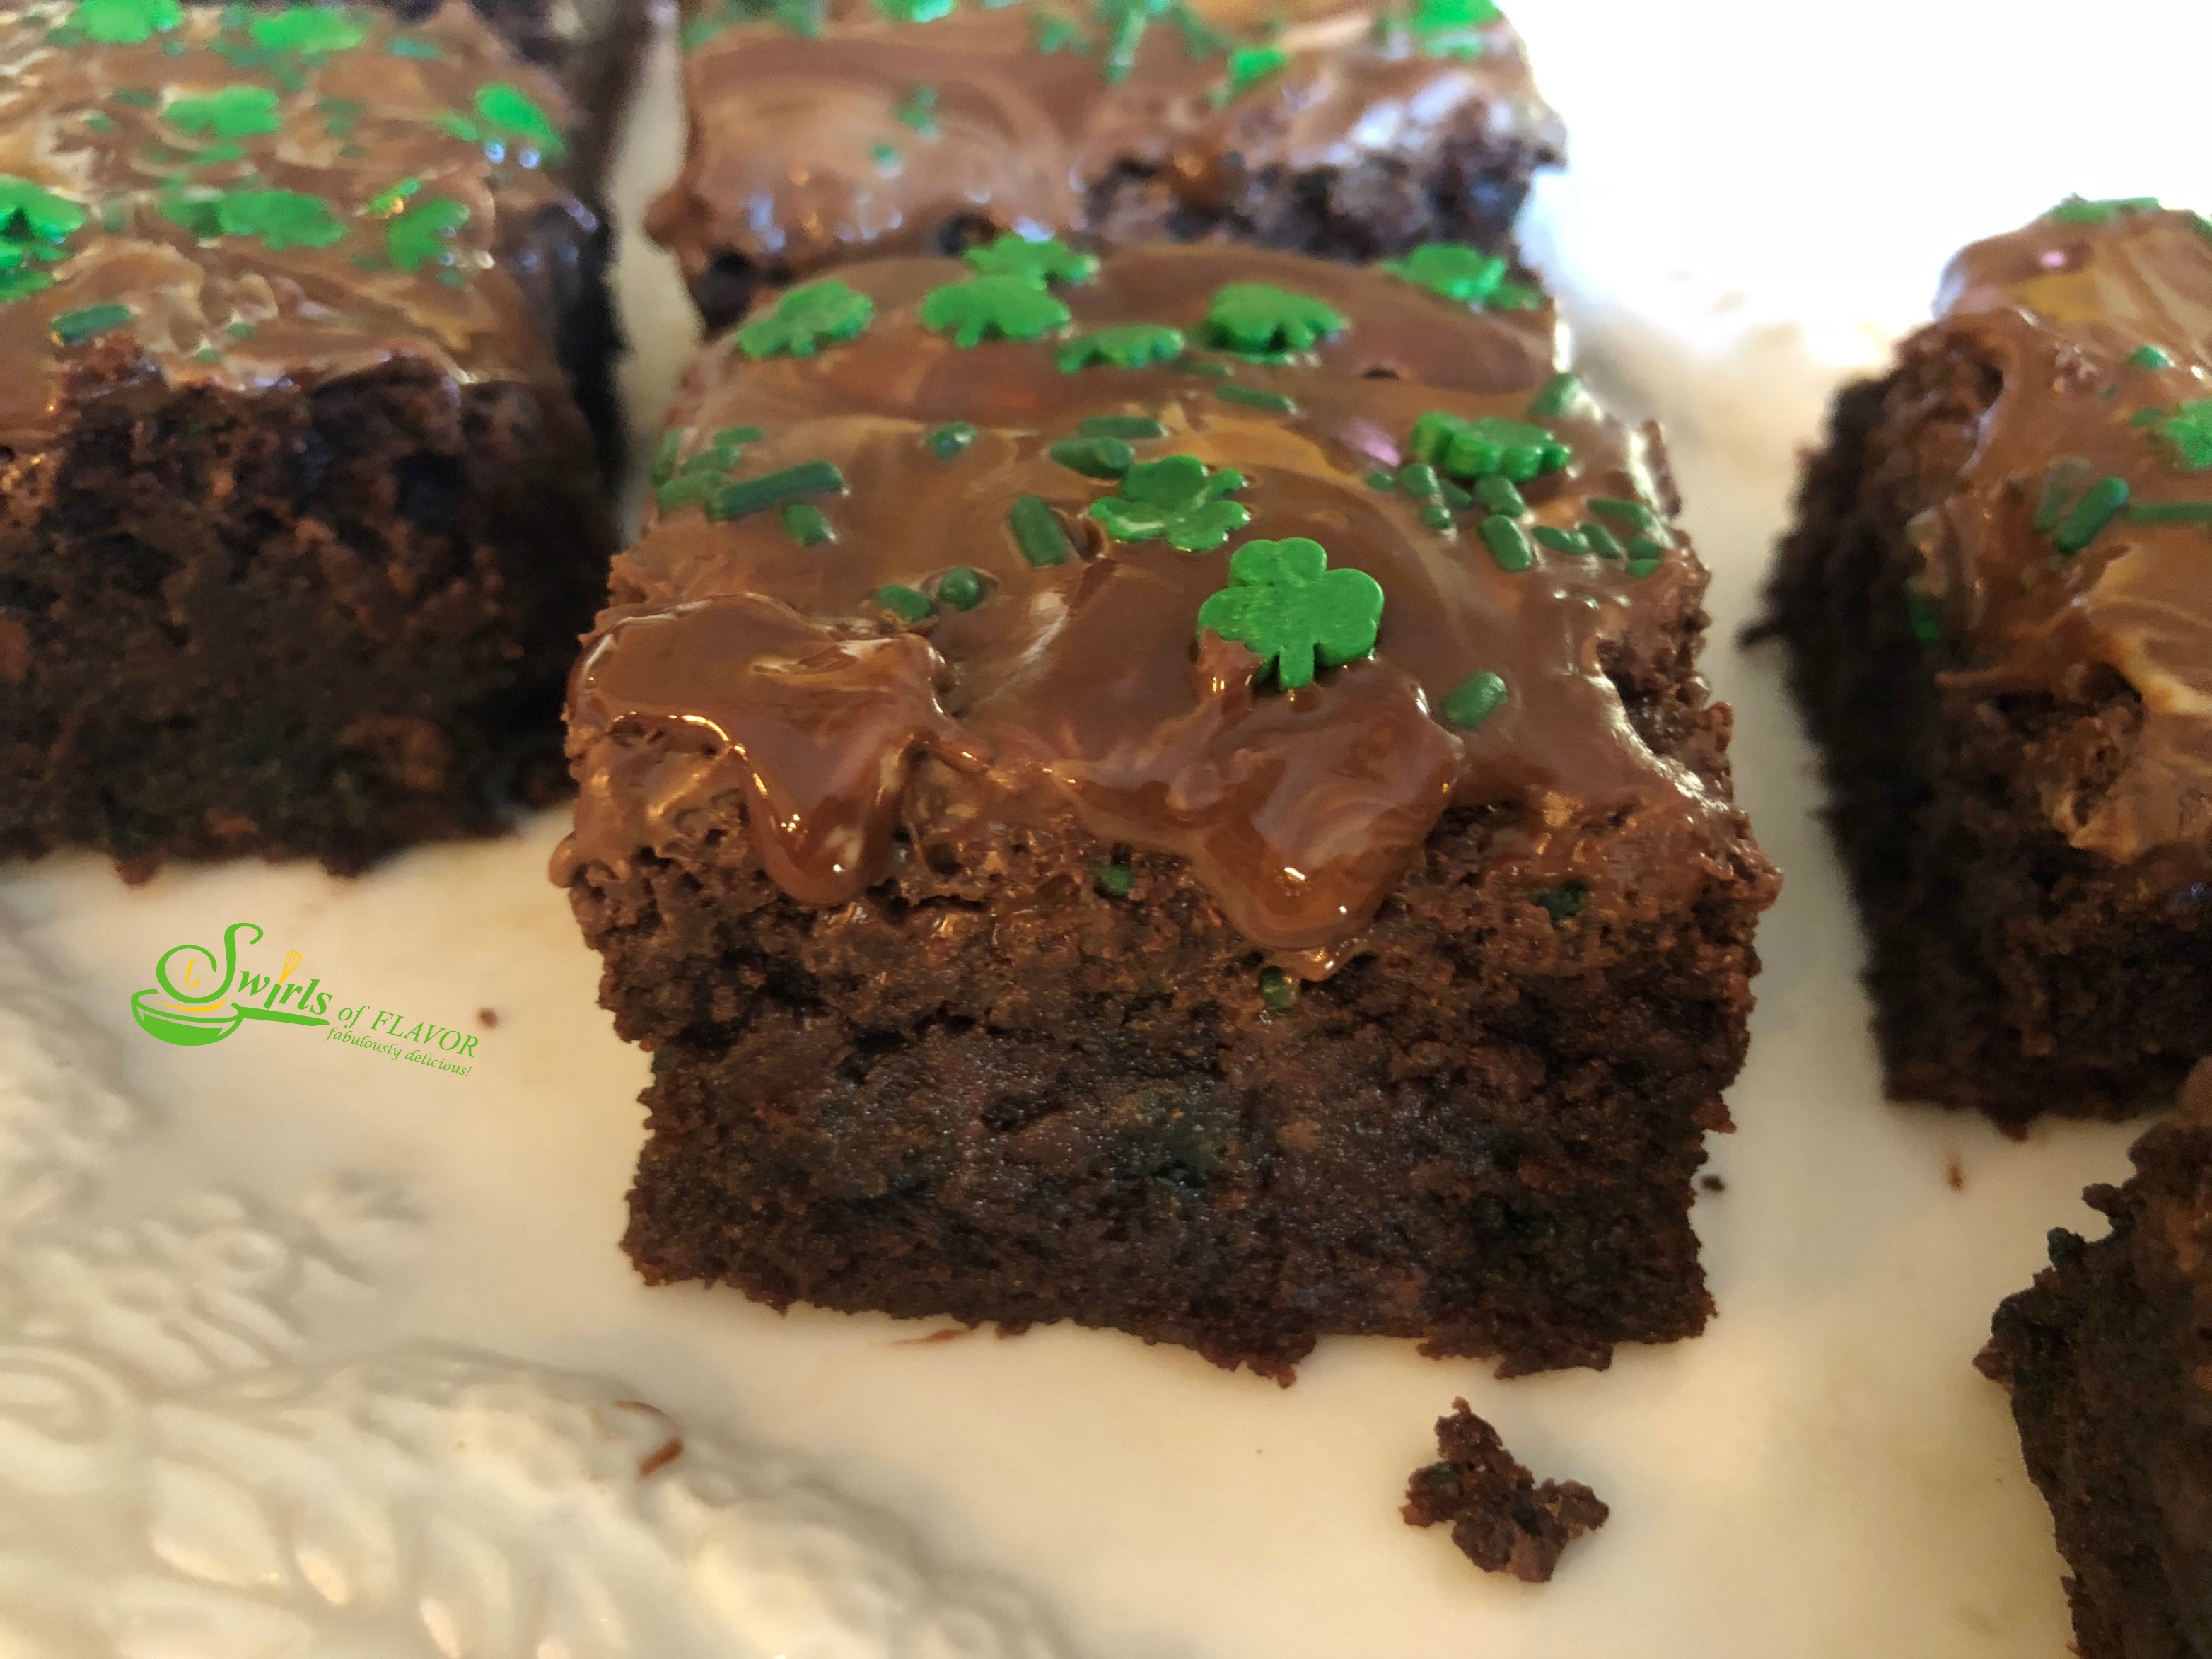 Homemade Chocolate Chip Mint Brownies, topped with a one ingredient mint frosting, is an easy dessert recipe for your Saint Patrick's Day celebration!